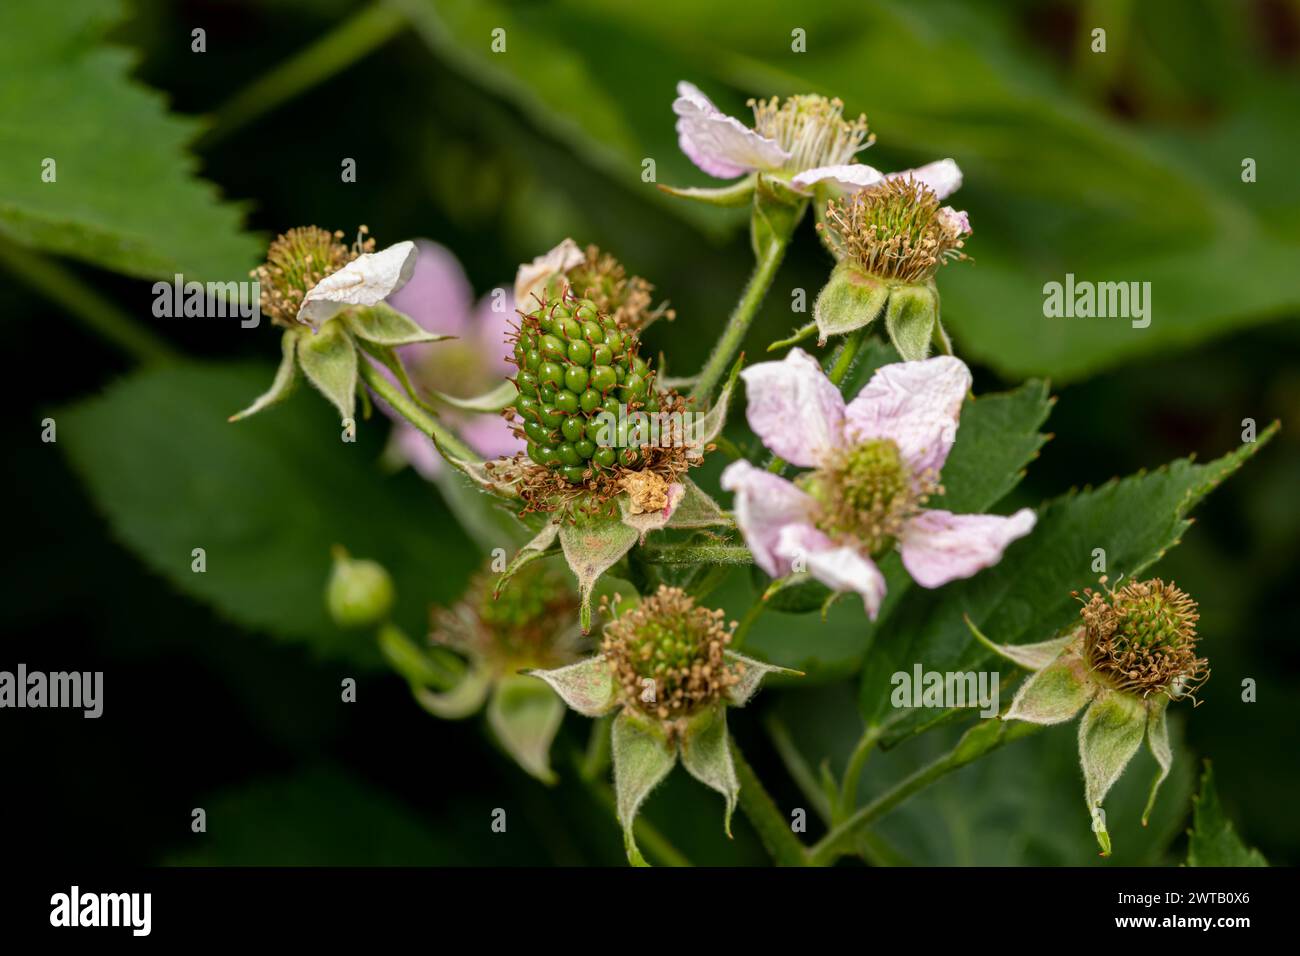 Blackberry plant flower and fruit growing in garden. Gardening, horticulture and farming concept Stock Photo